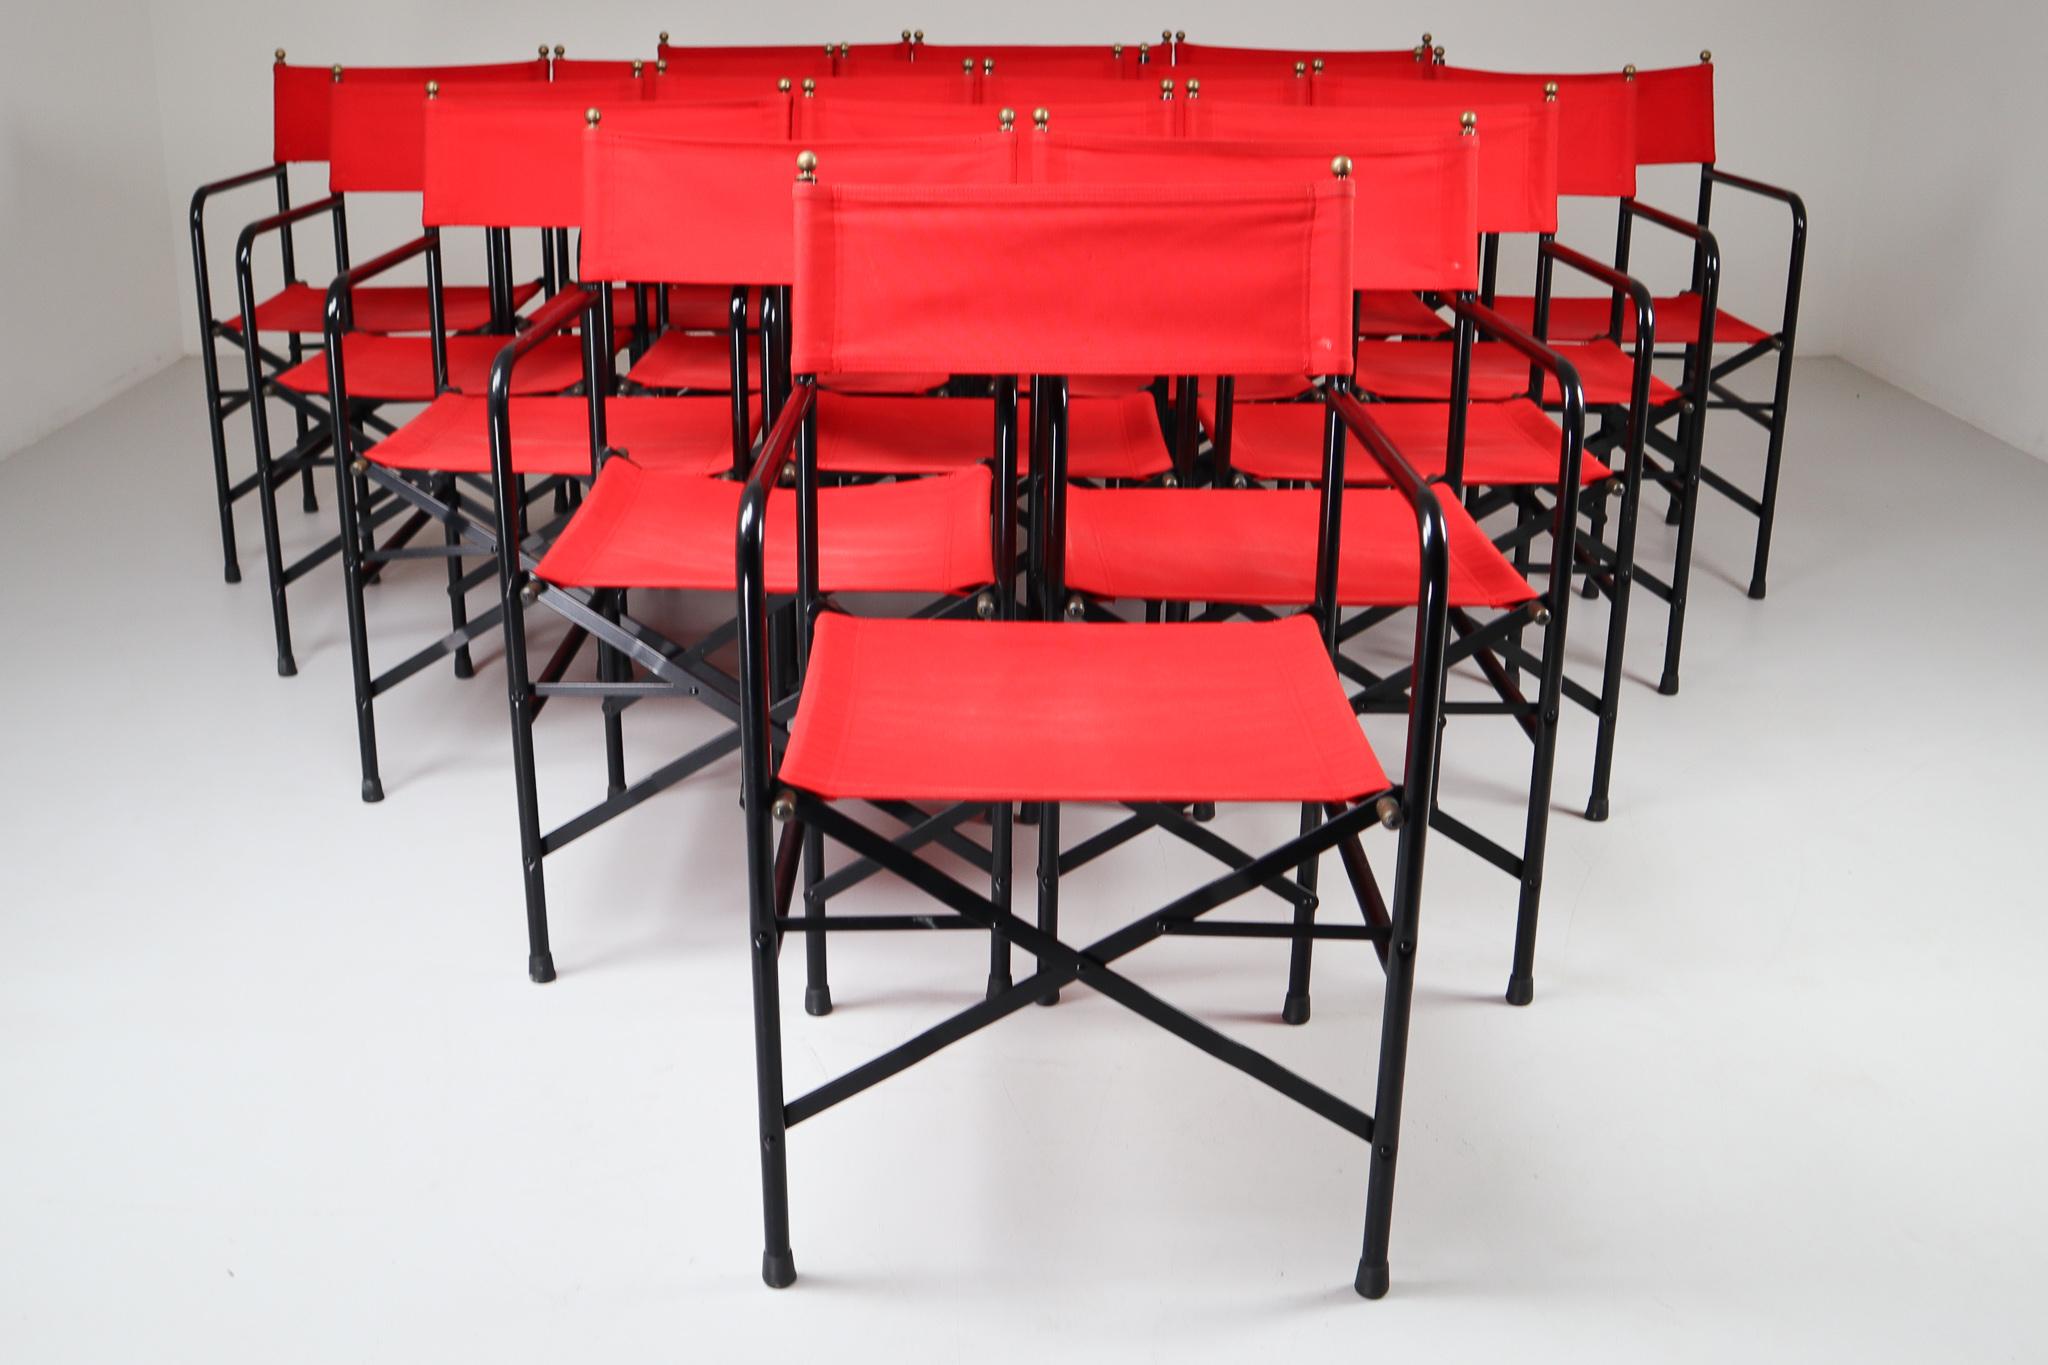 18 Venetian Folding-Patio-Garden Chairs in Steel, Brass and Red Fabric, 1980s For Sale 4